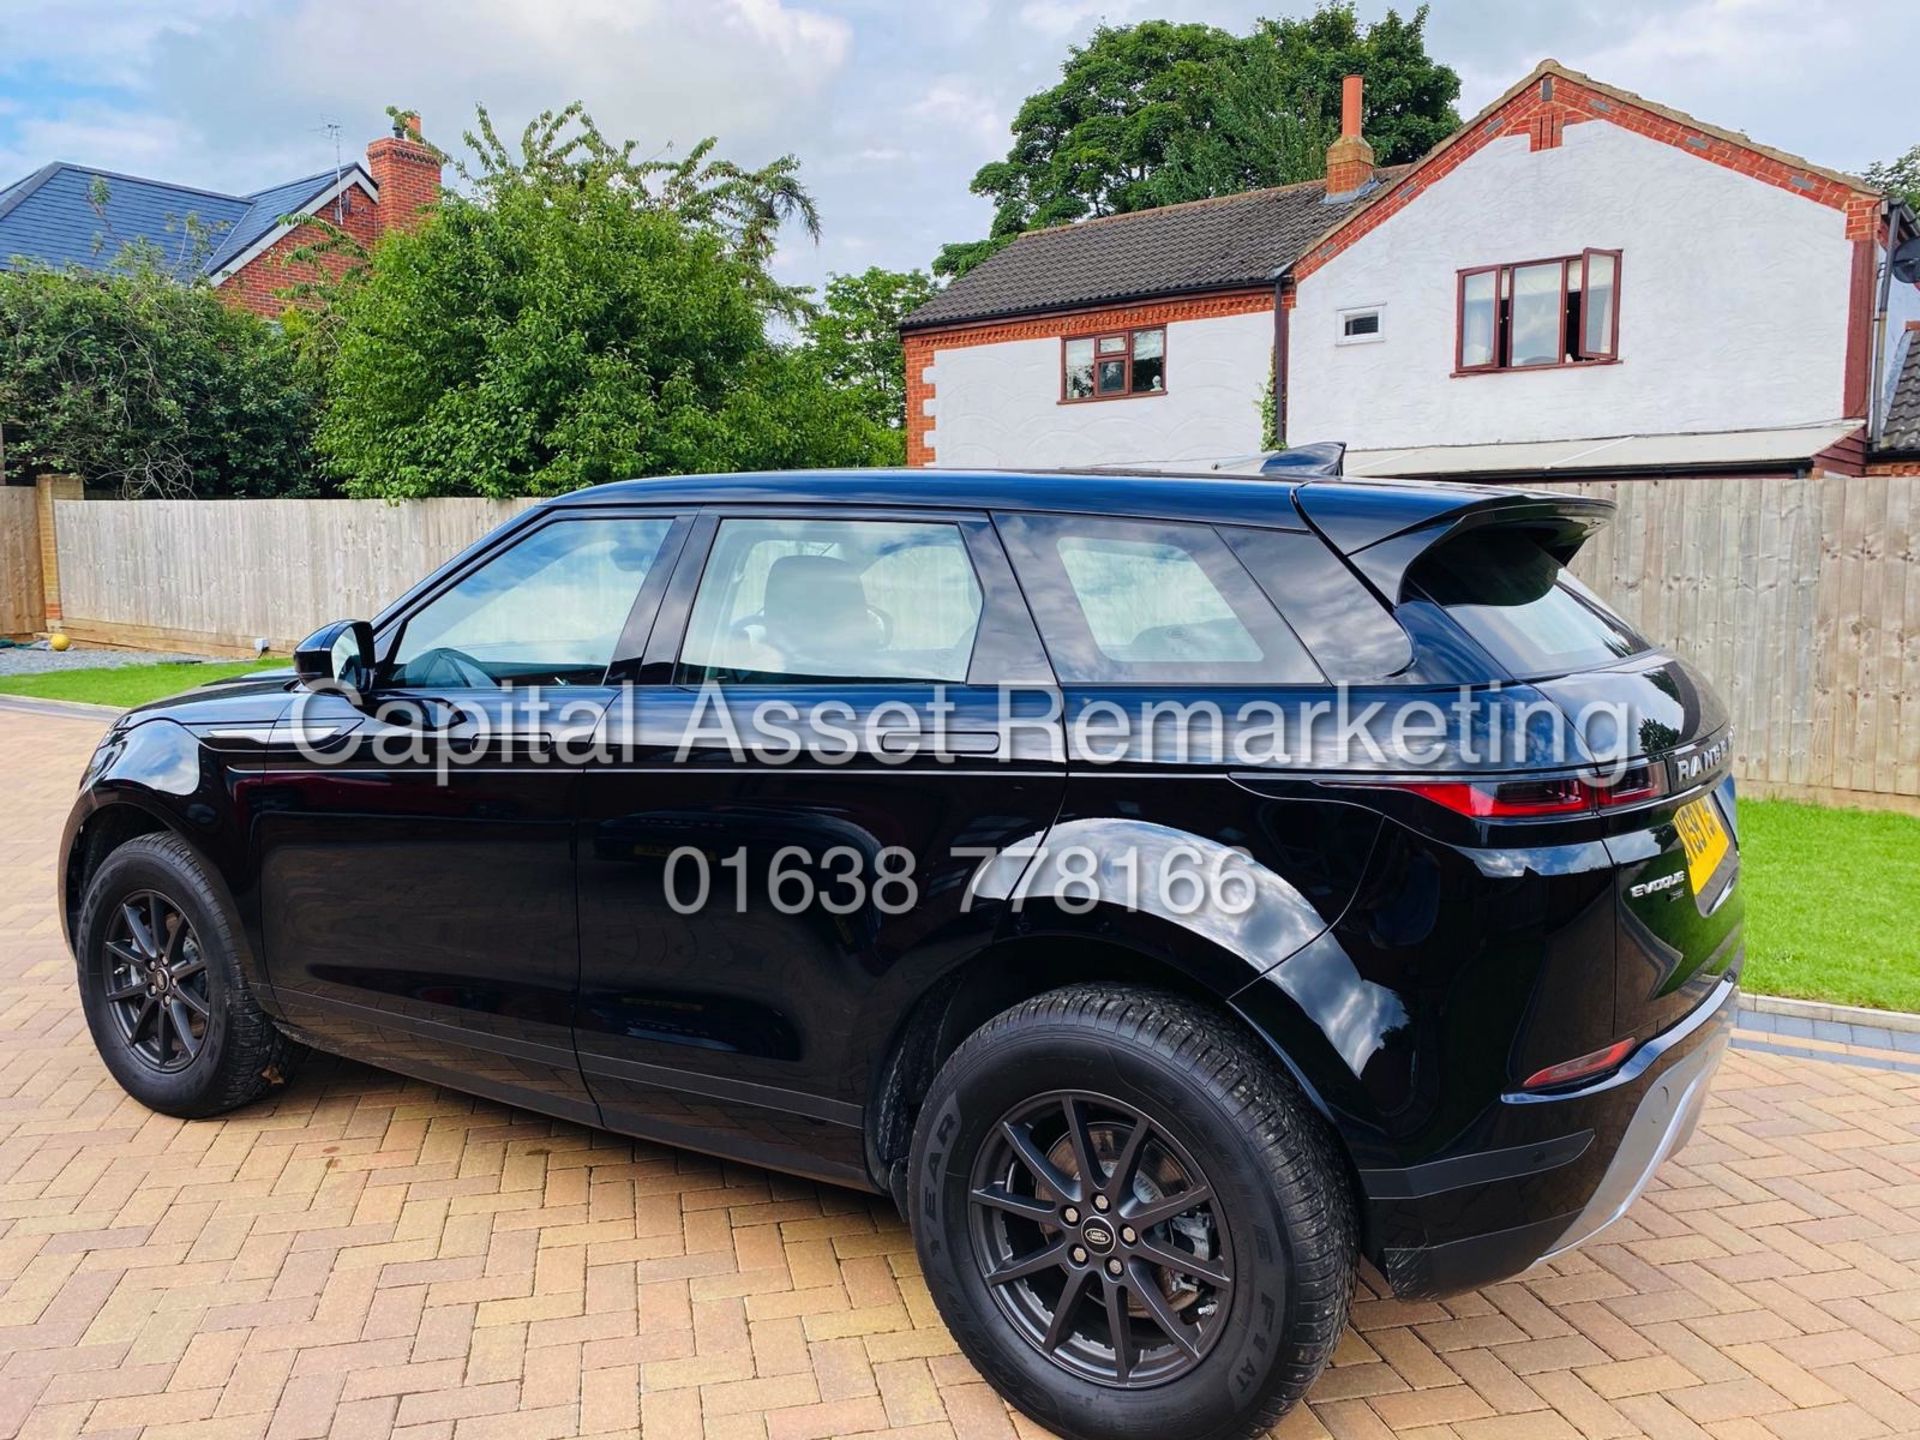 On Sale RANGE ROVER EVOQUE 2.0 (D150) "BLACK EDITION" (2020 MODEL) 1 KEEPER - GREAT SPEC -NEW SHAPE! - Image 8 of 20